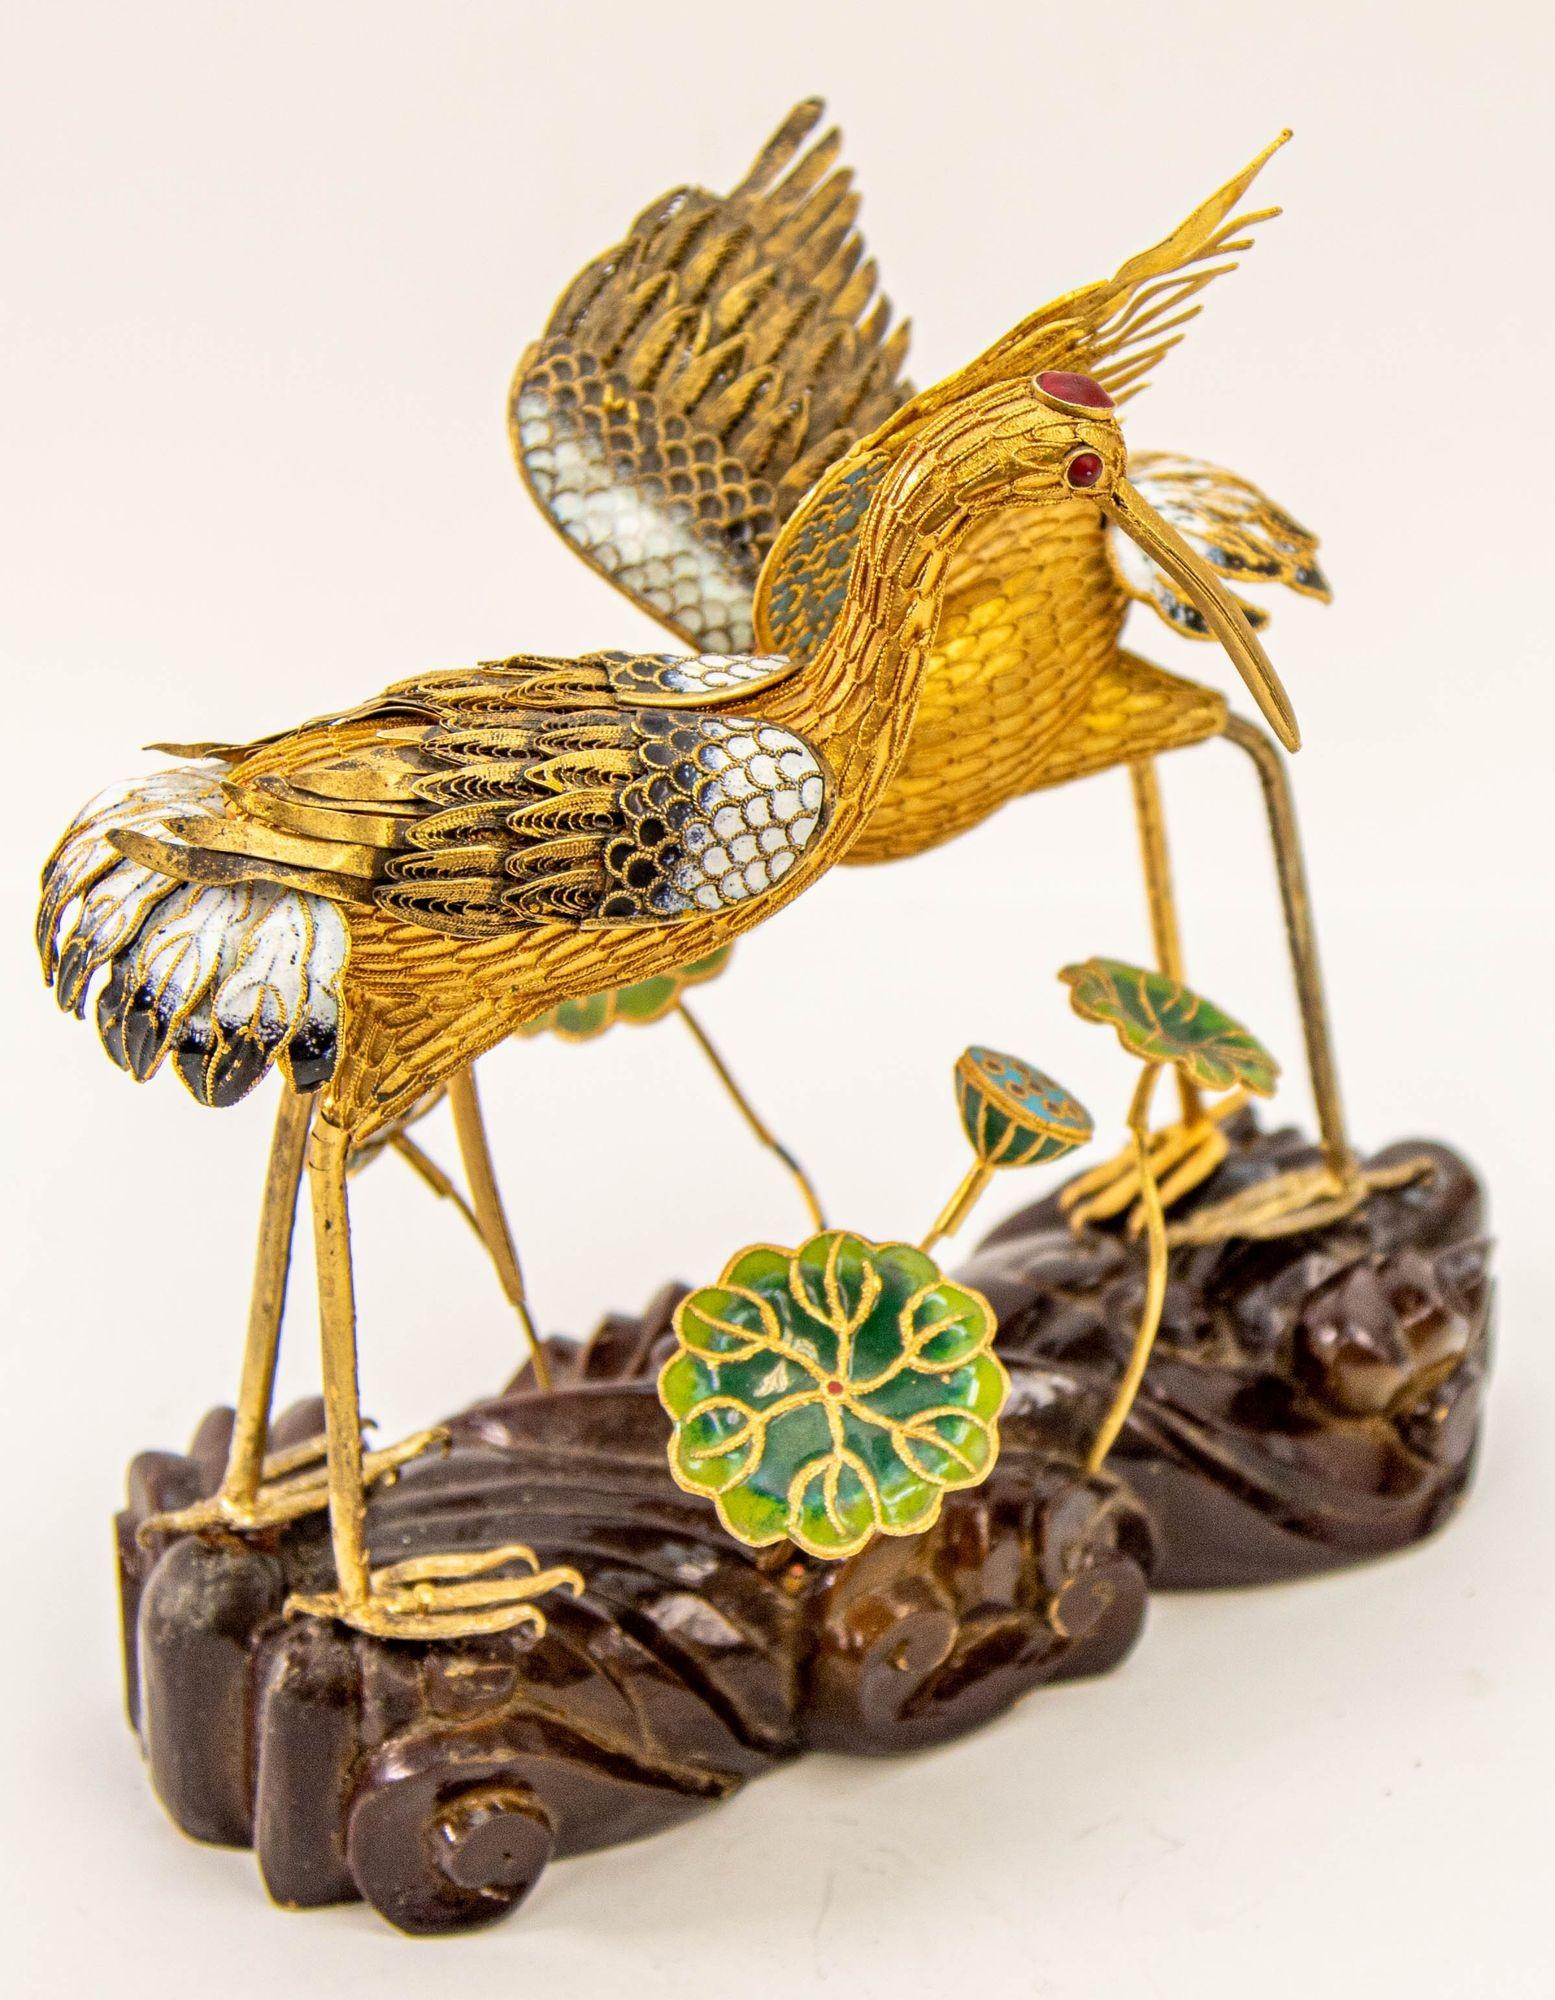 Vintage Chinese Metal Gilt Filigree and Enamel Cranes Figures on Wooden Stand In Good Condition For Sale In North Hollywood, CA